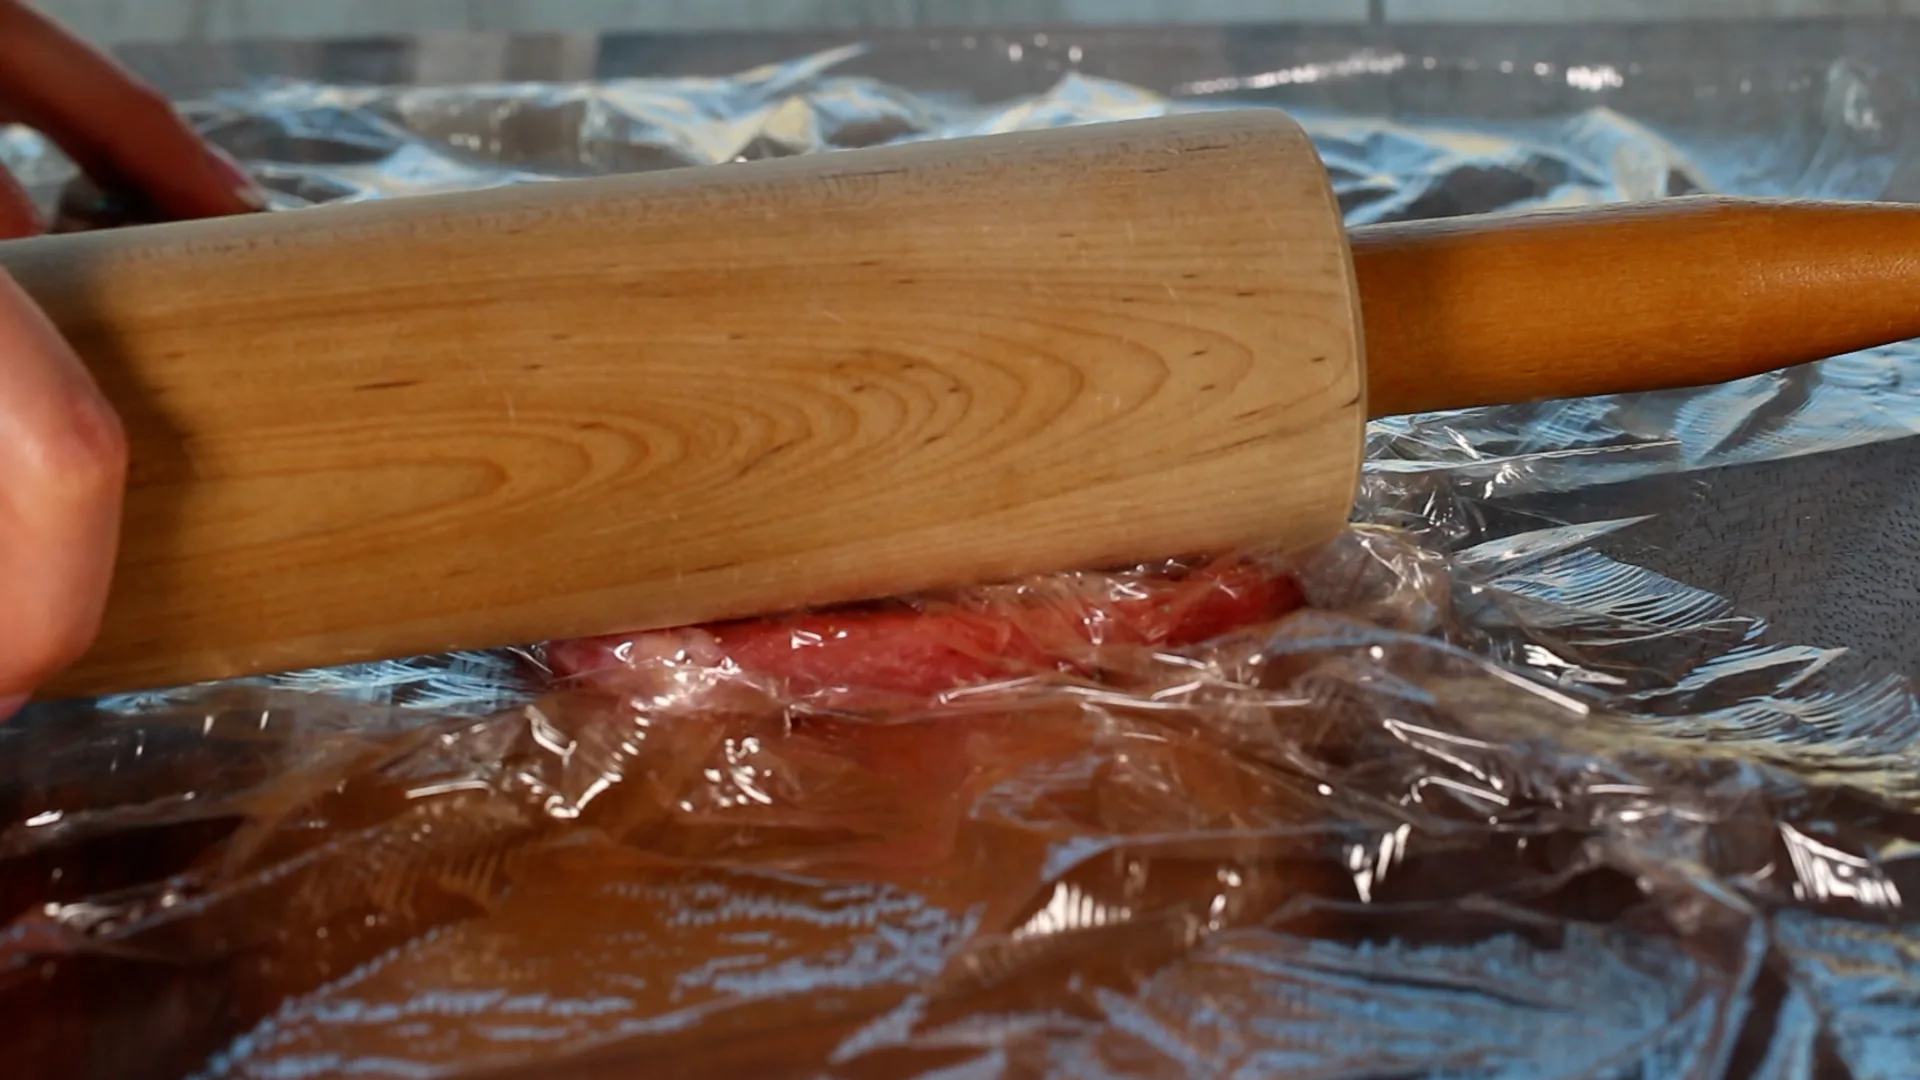 A rolling pin being used to tenderize the meat between plastic wrap.